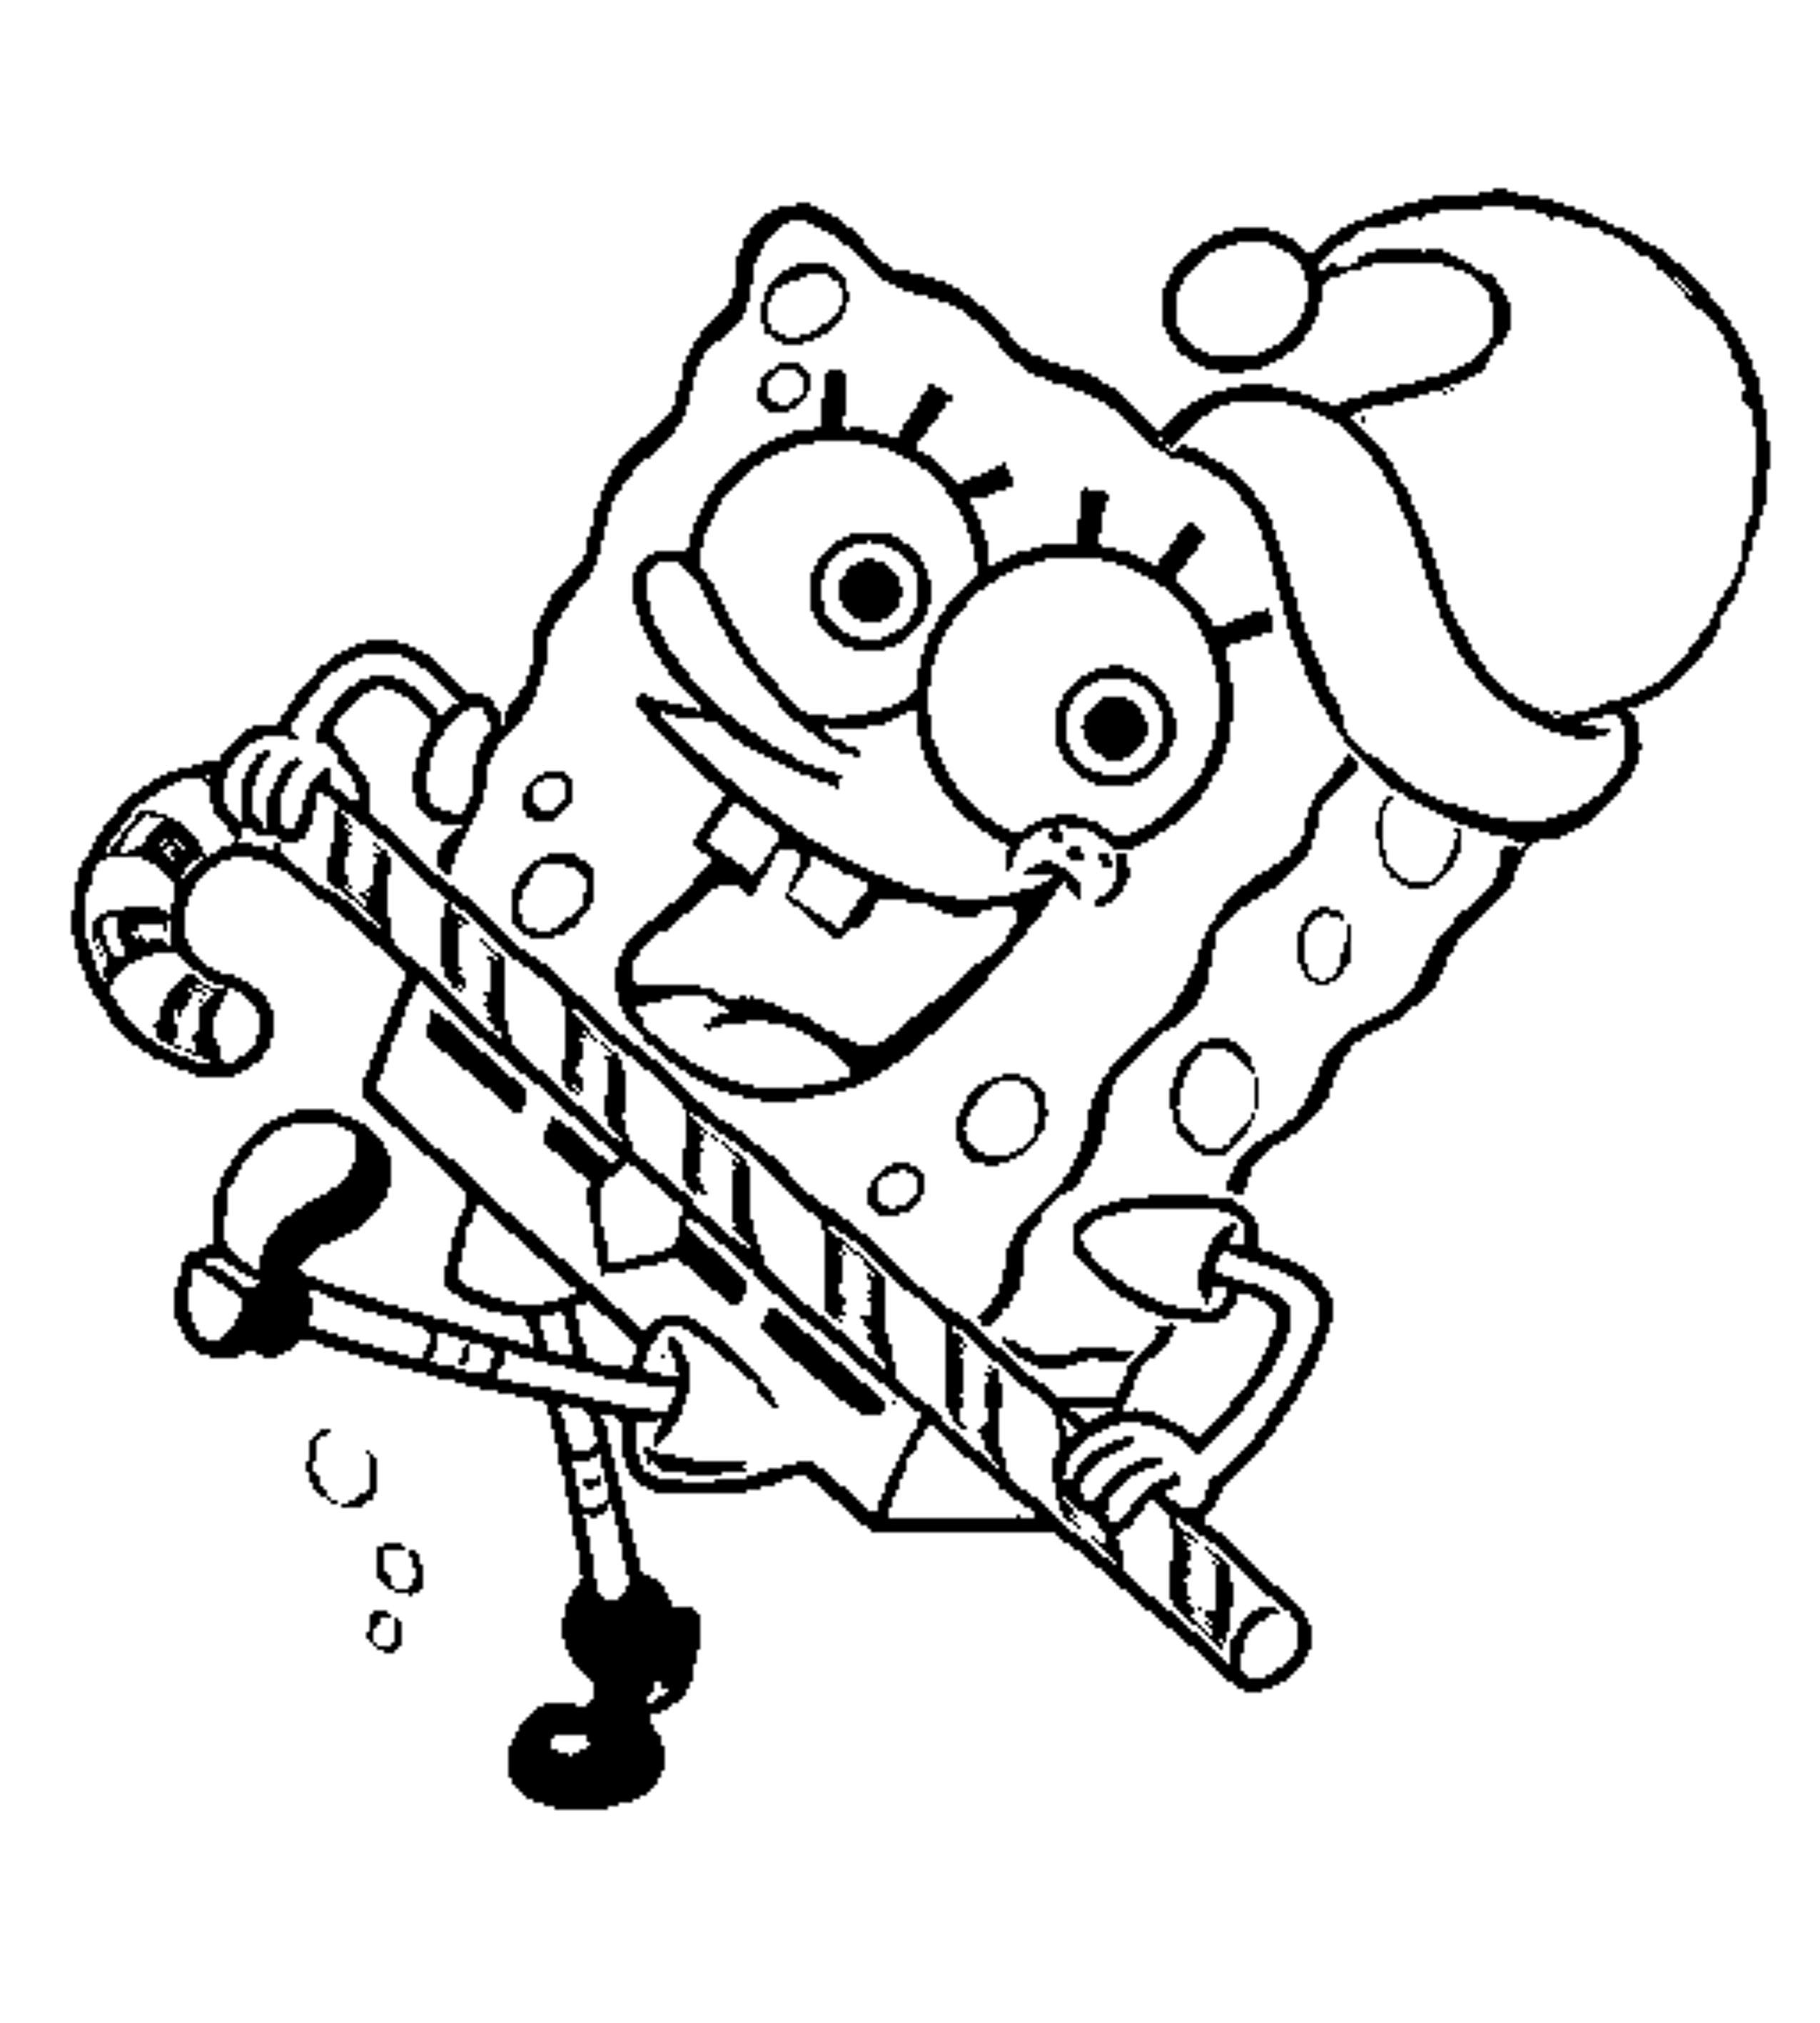 Spongebob Characters 55 Cool Coloring Page